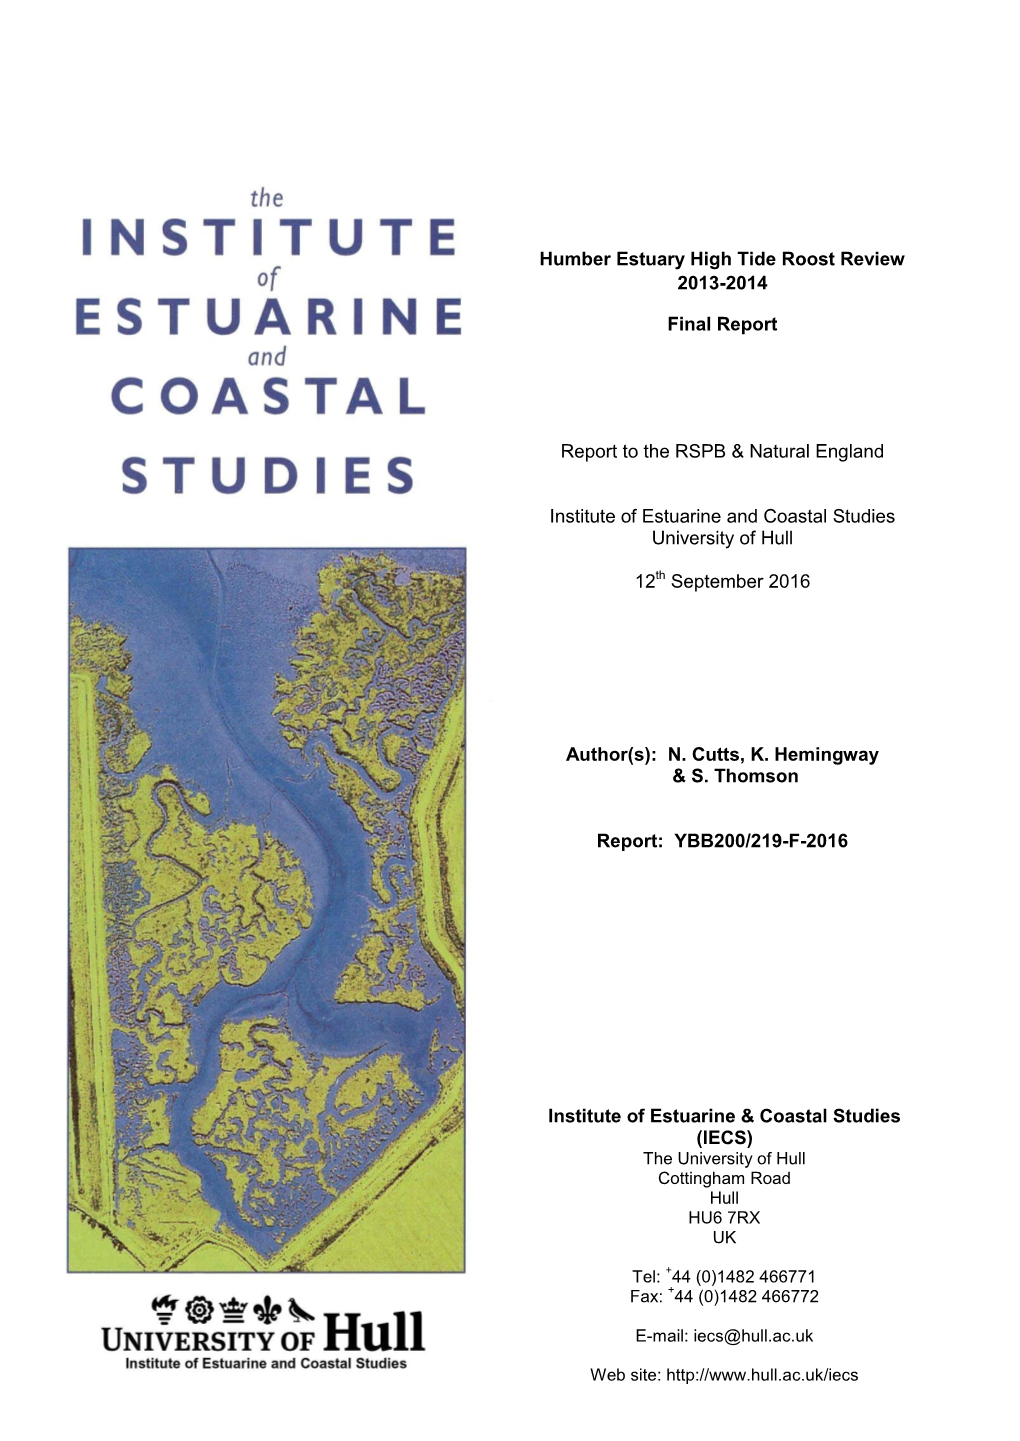 Humber Estuary High Tide Roost Review 2013-2014